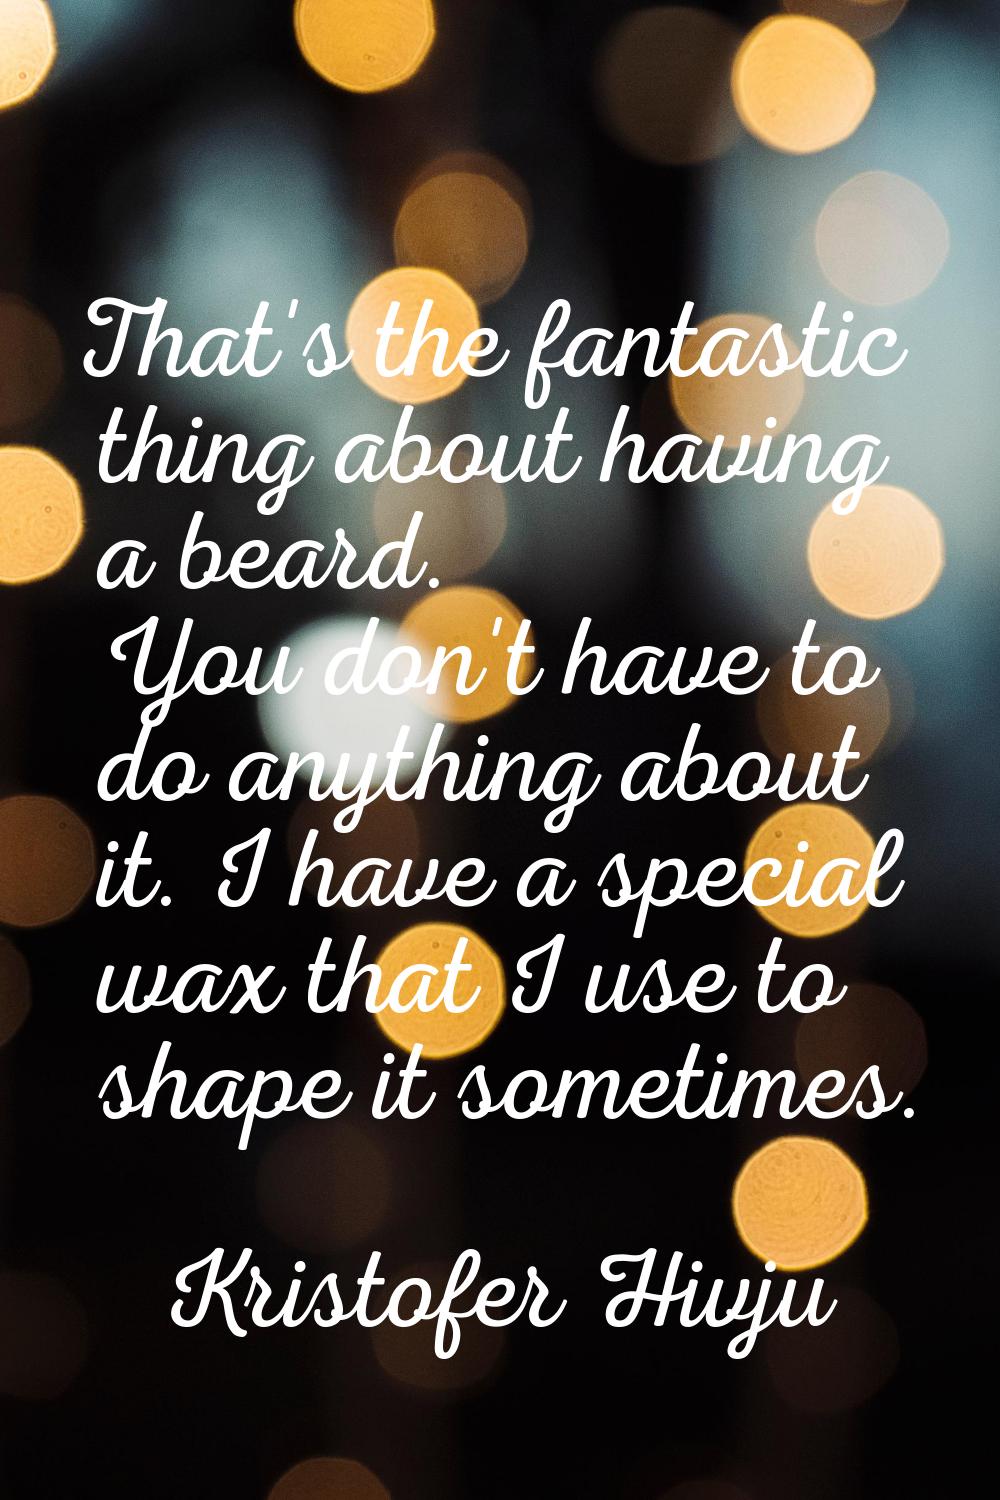 That's the fantastic thing about having a beard. You don't have to do anything about it. I have a s